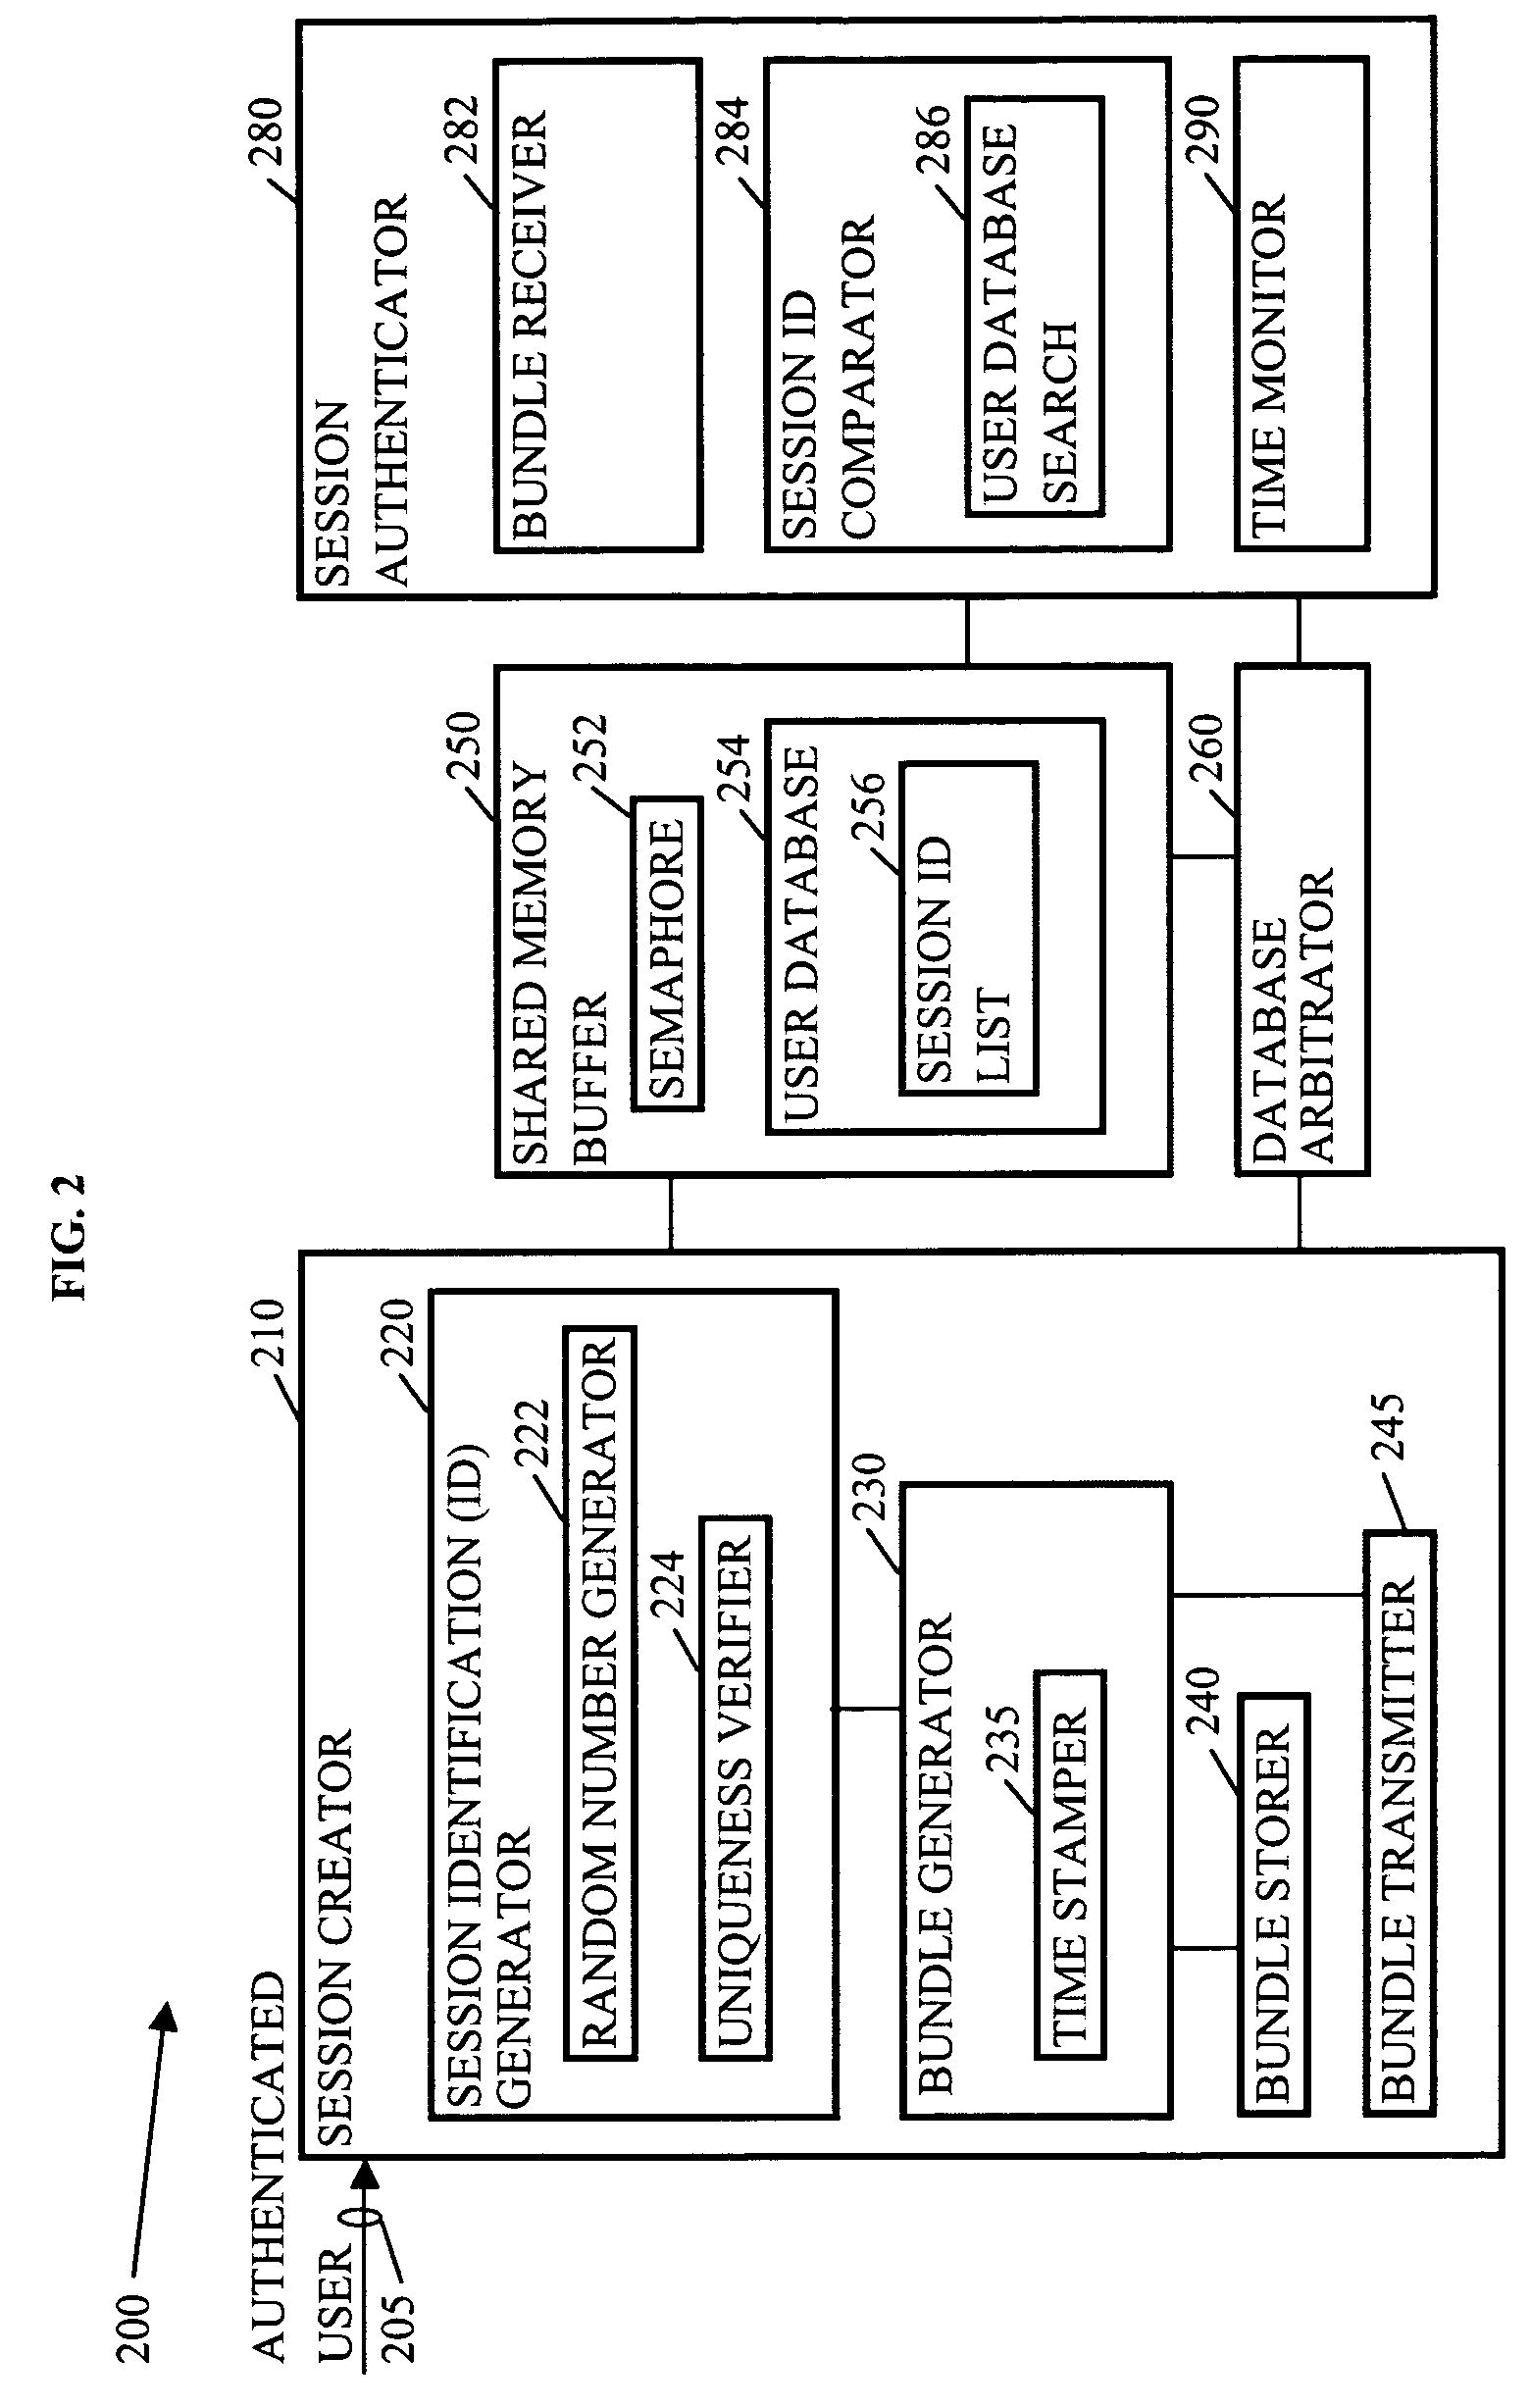 Methods, systems, and media to authenticate a user